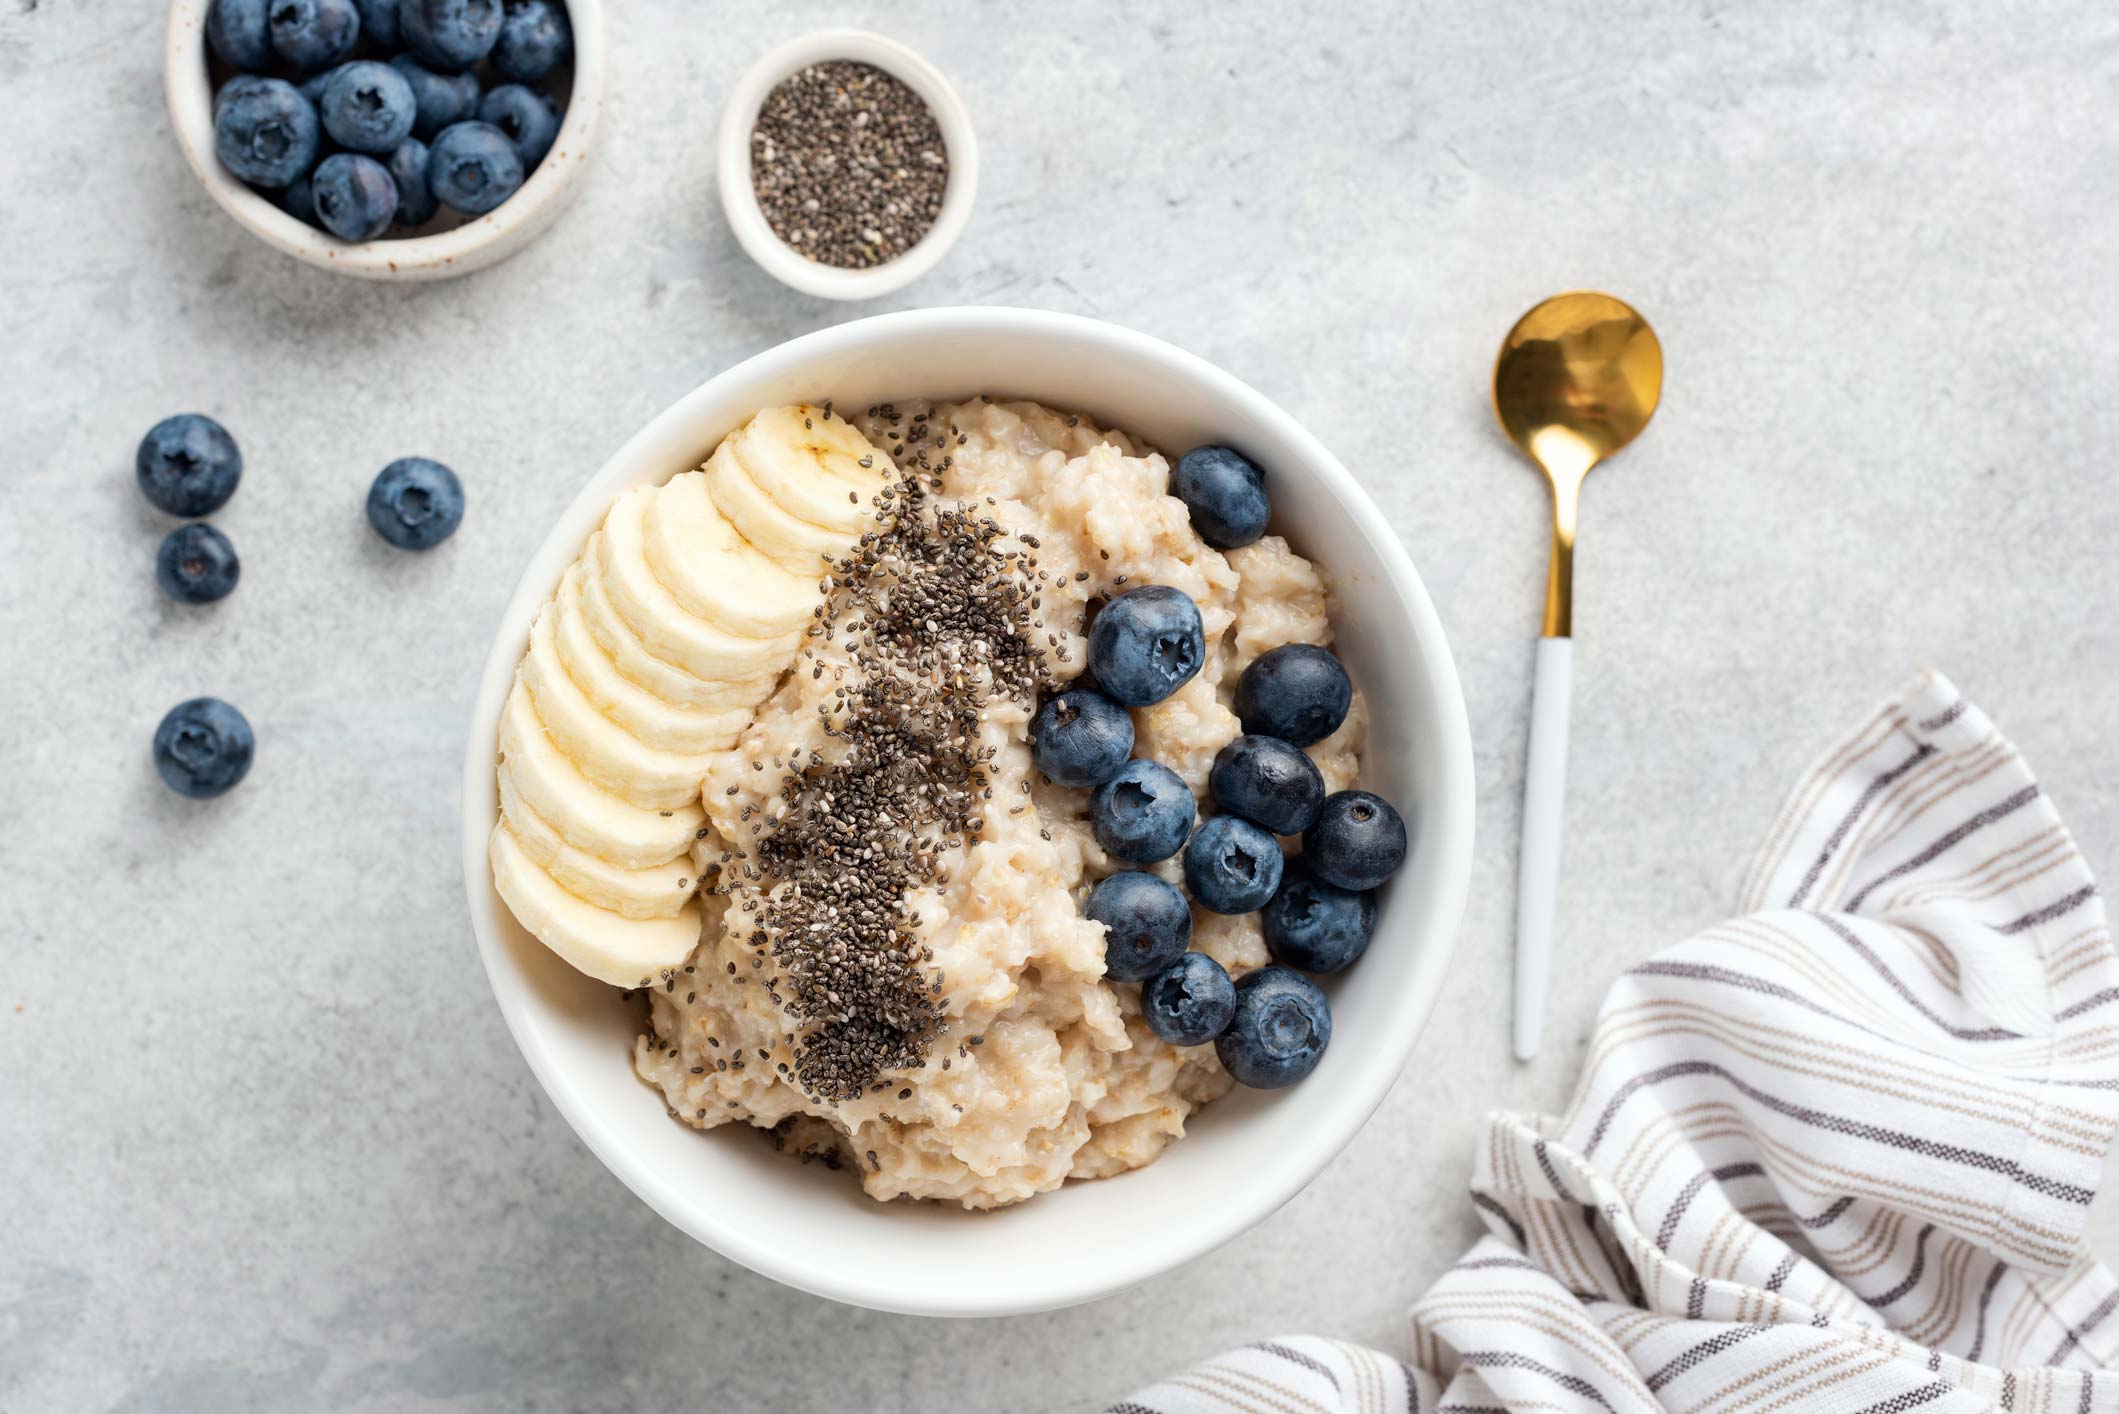 Oats: Nutrition, Benefits, Downsides, Uses